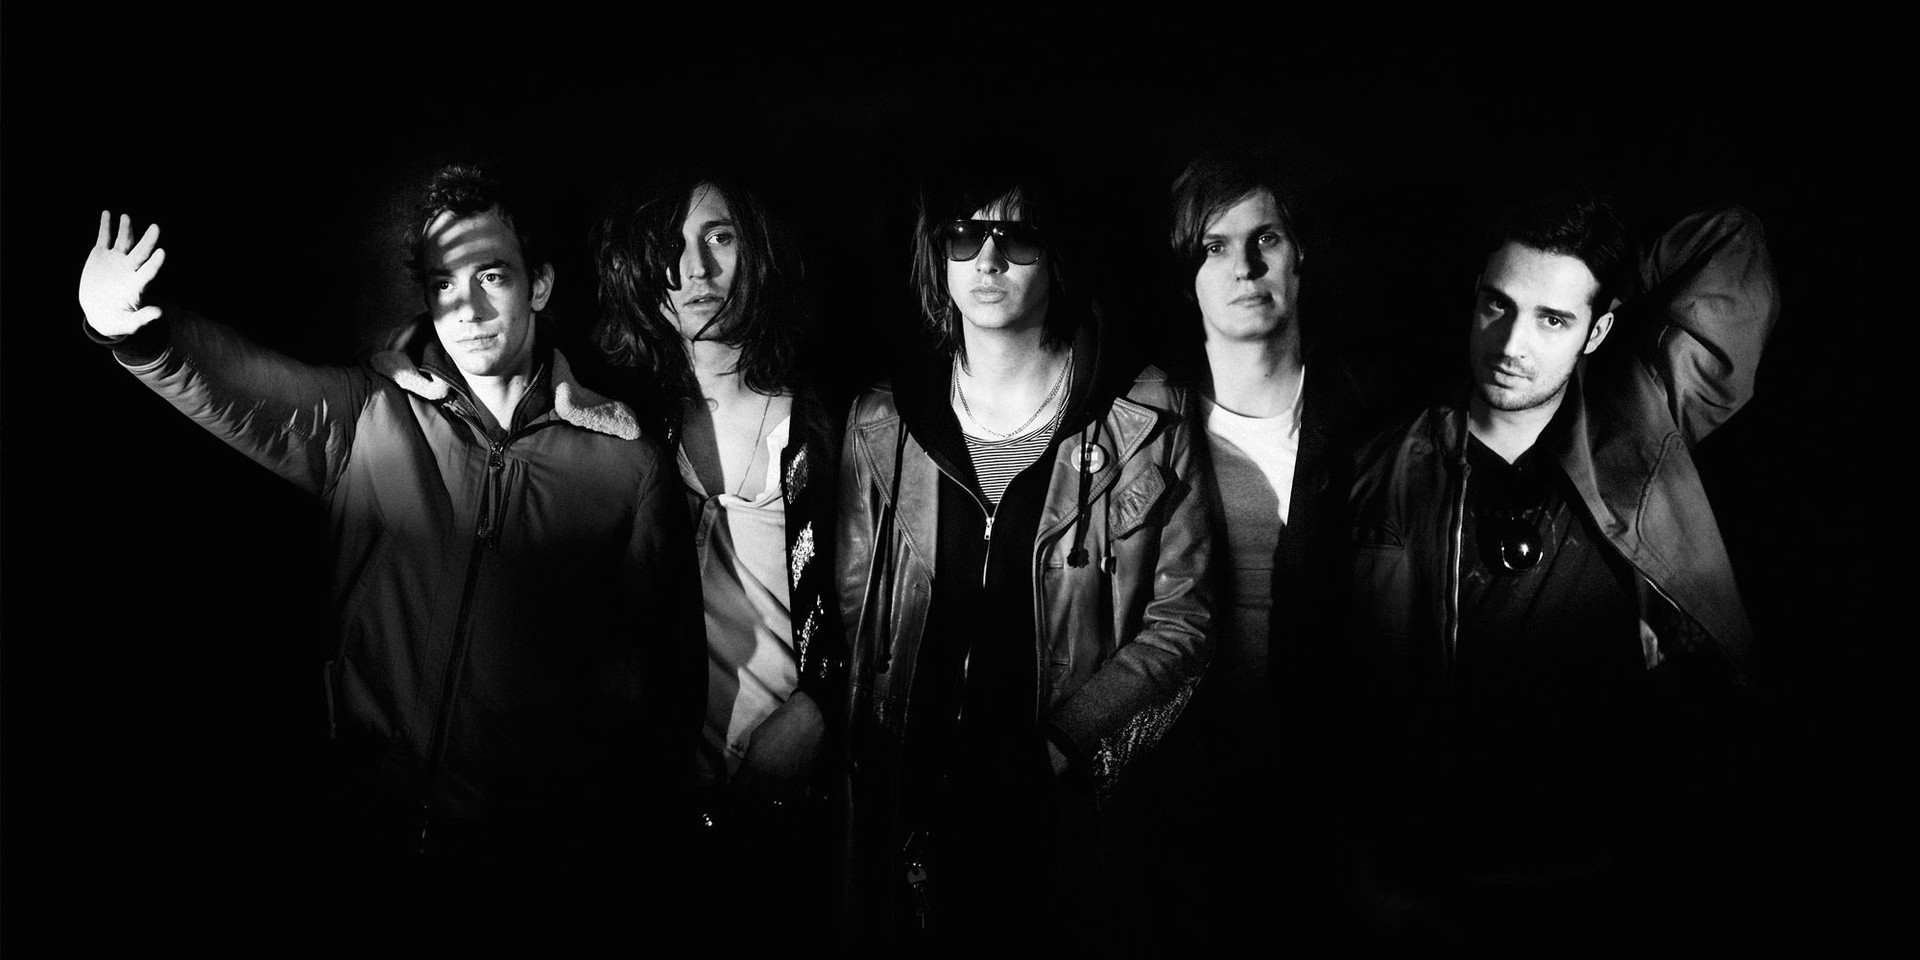 Filipino fans of The Strokes react to the band's 'Future Present Past'